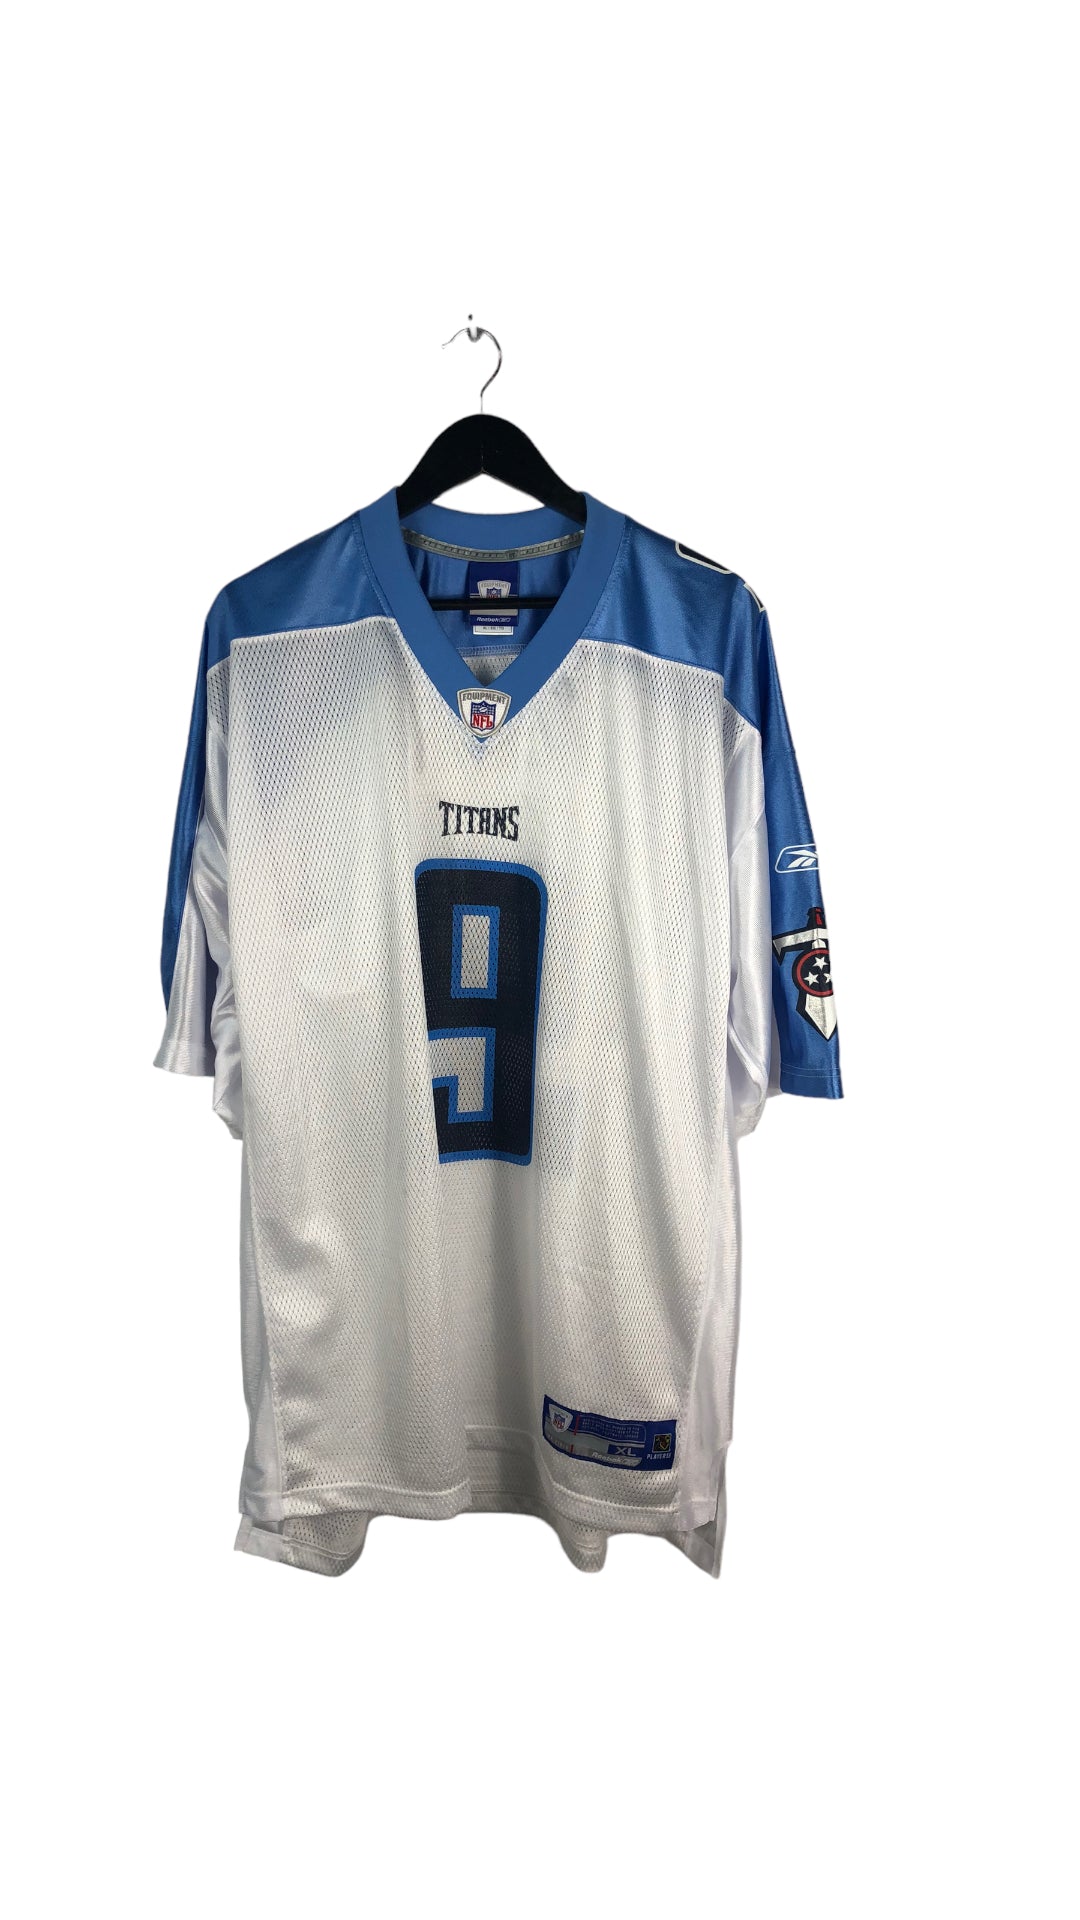 Load image into Gallery viewer, VTG Steve McNair Tennessee Titans Away Jersey Sz XL
